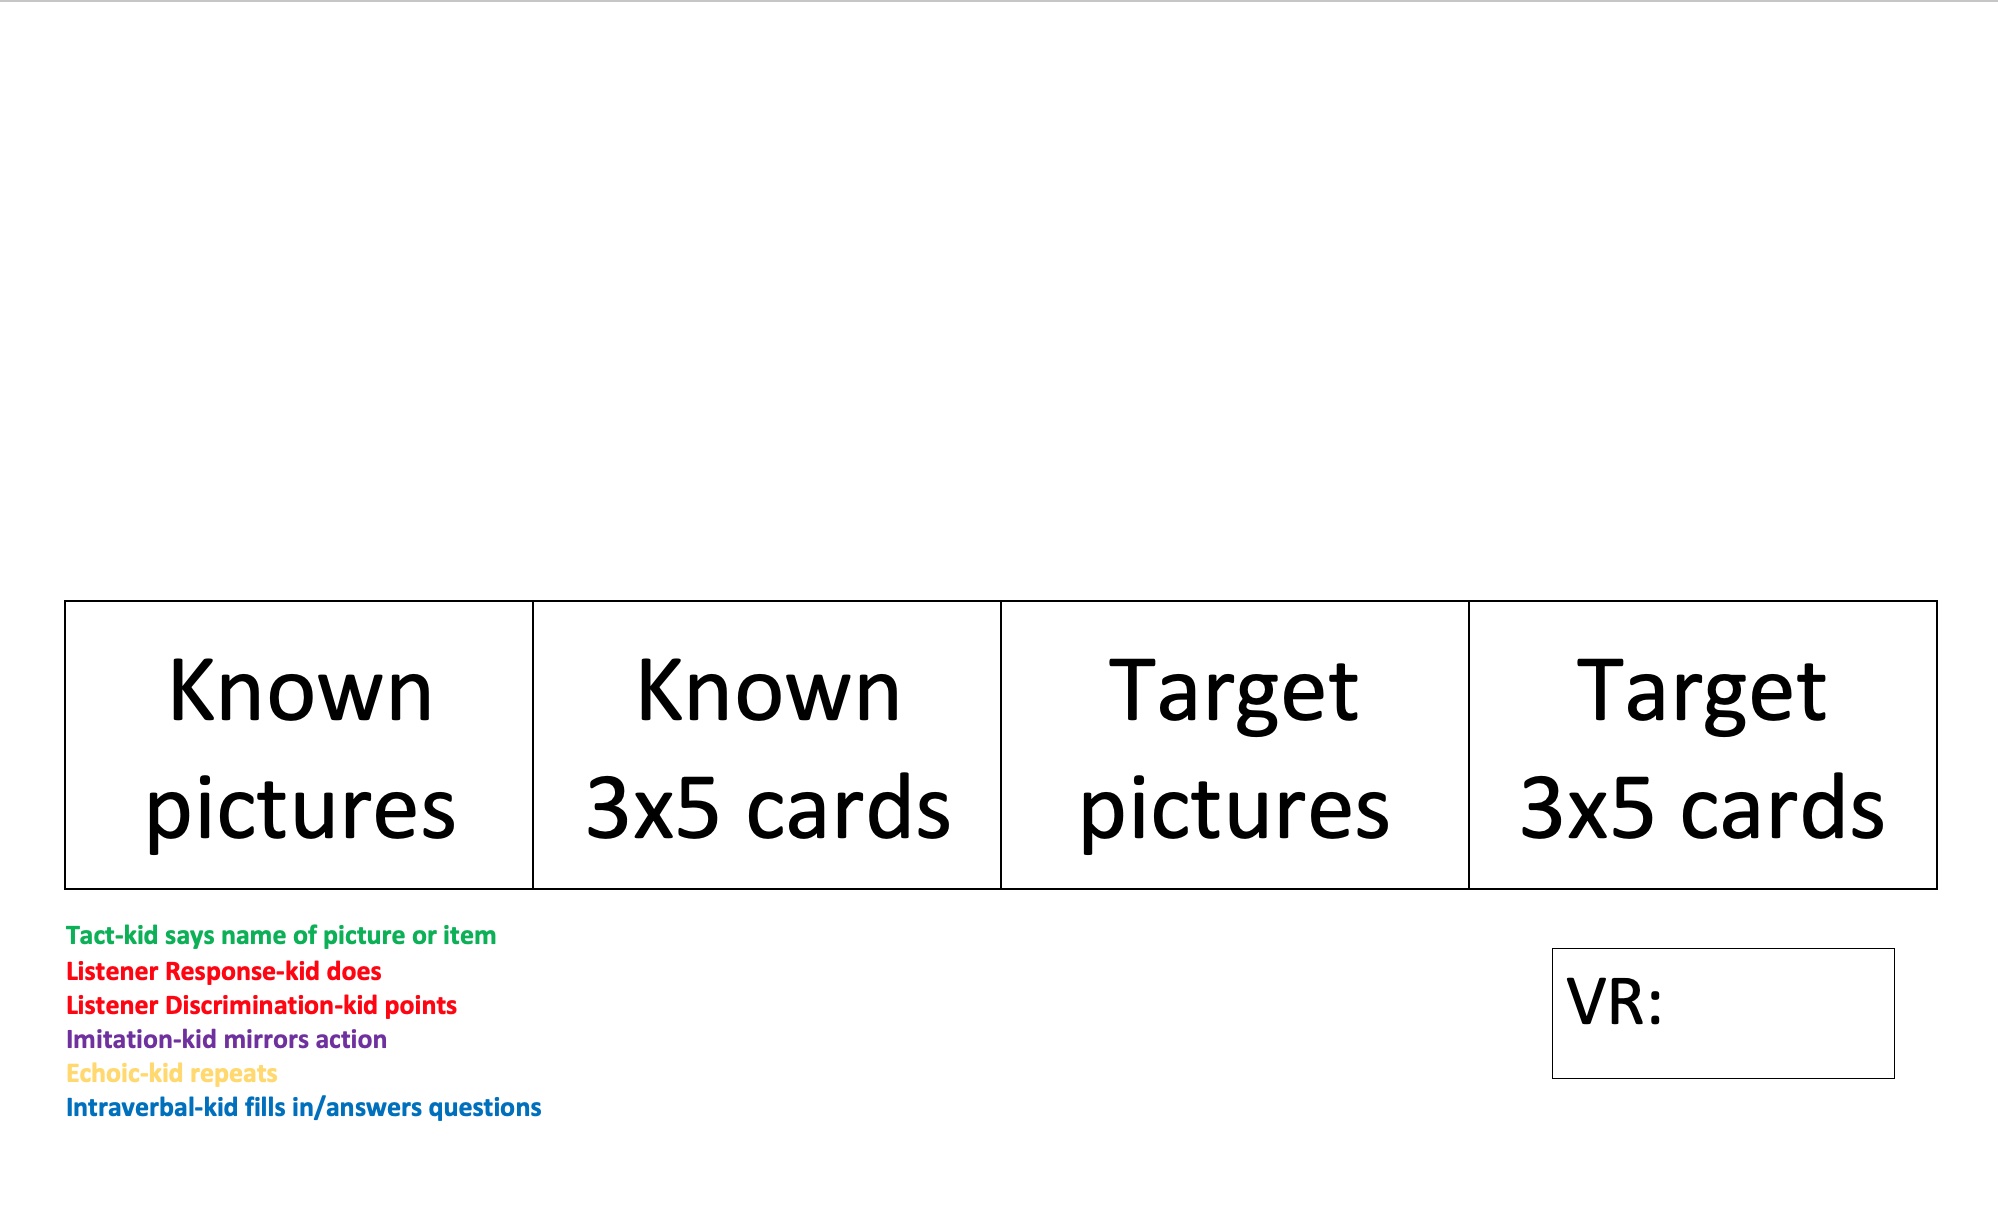 preview image of Card Sort training placemat 11.22 (1).pdf for Card Sort Training Placemat